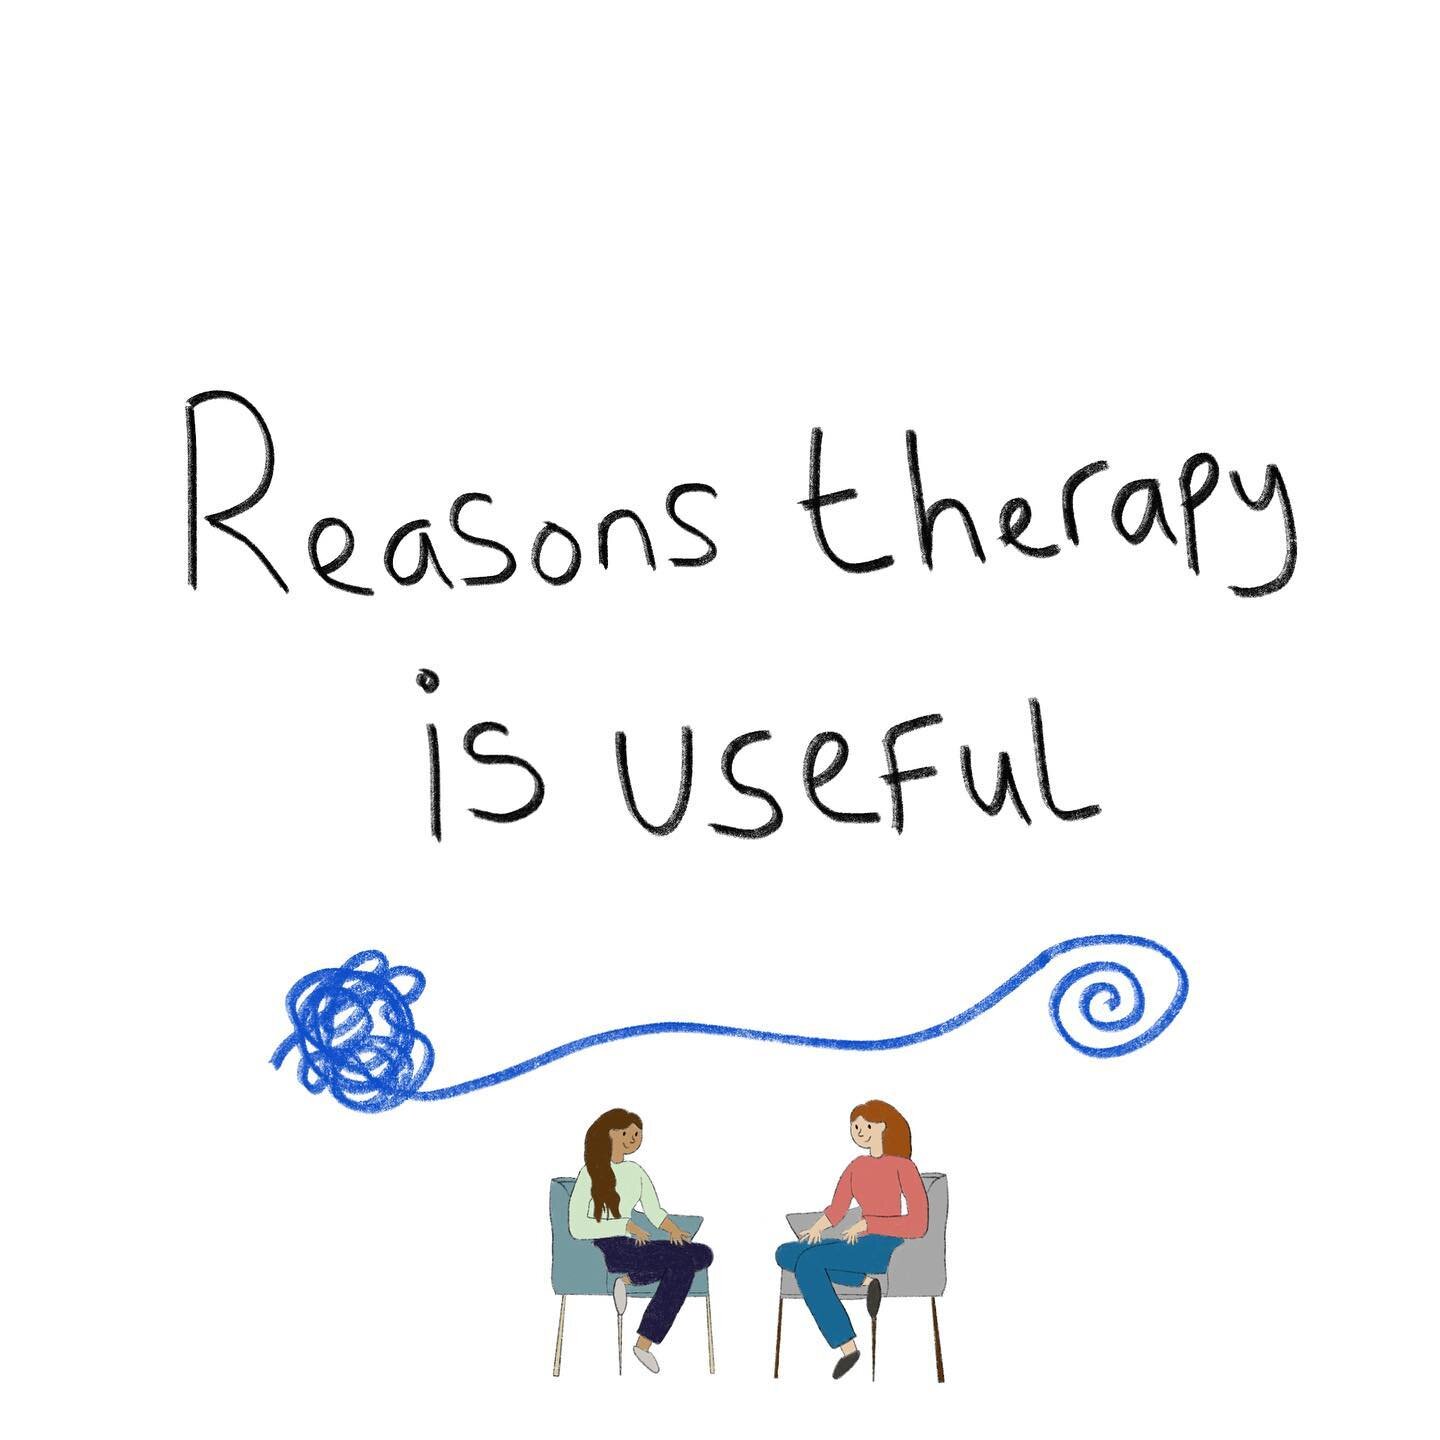 Therapy shouldn&rsquo;t feel just like a casual conversation over coffee with a friend. 

Of course it is okay at times for therapy to be lighthearted. 

However, therapy is a great resource to learn new skills, be held accountable, look at situation